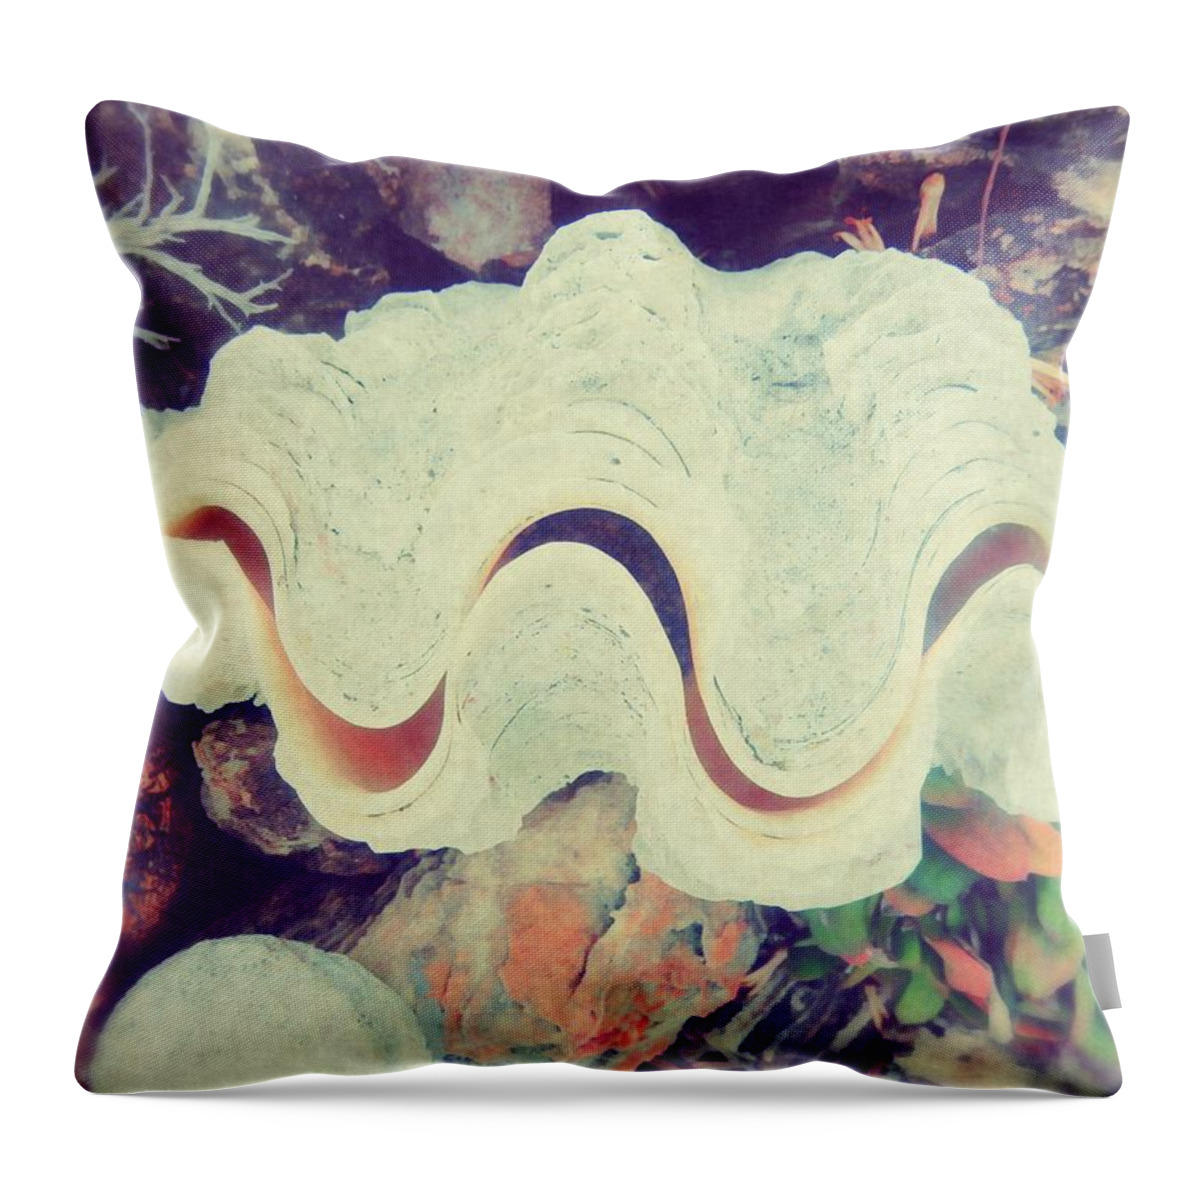 Giant Clam Throw Pillow featuring the photograph Coastal Clam by Karen Jbon Lee